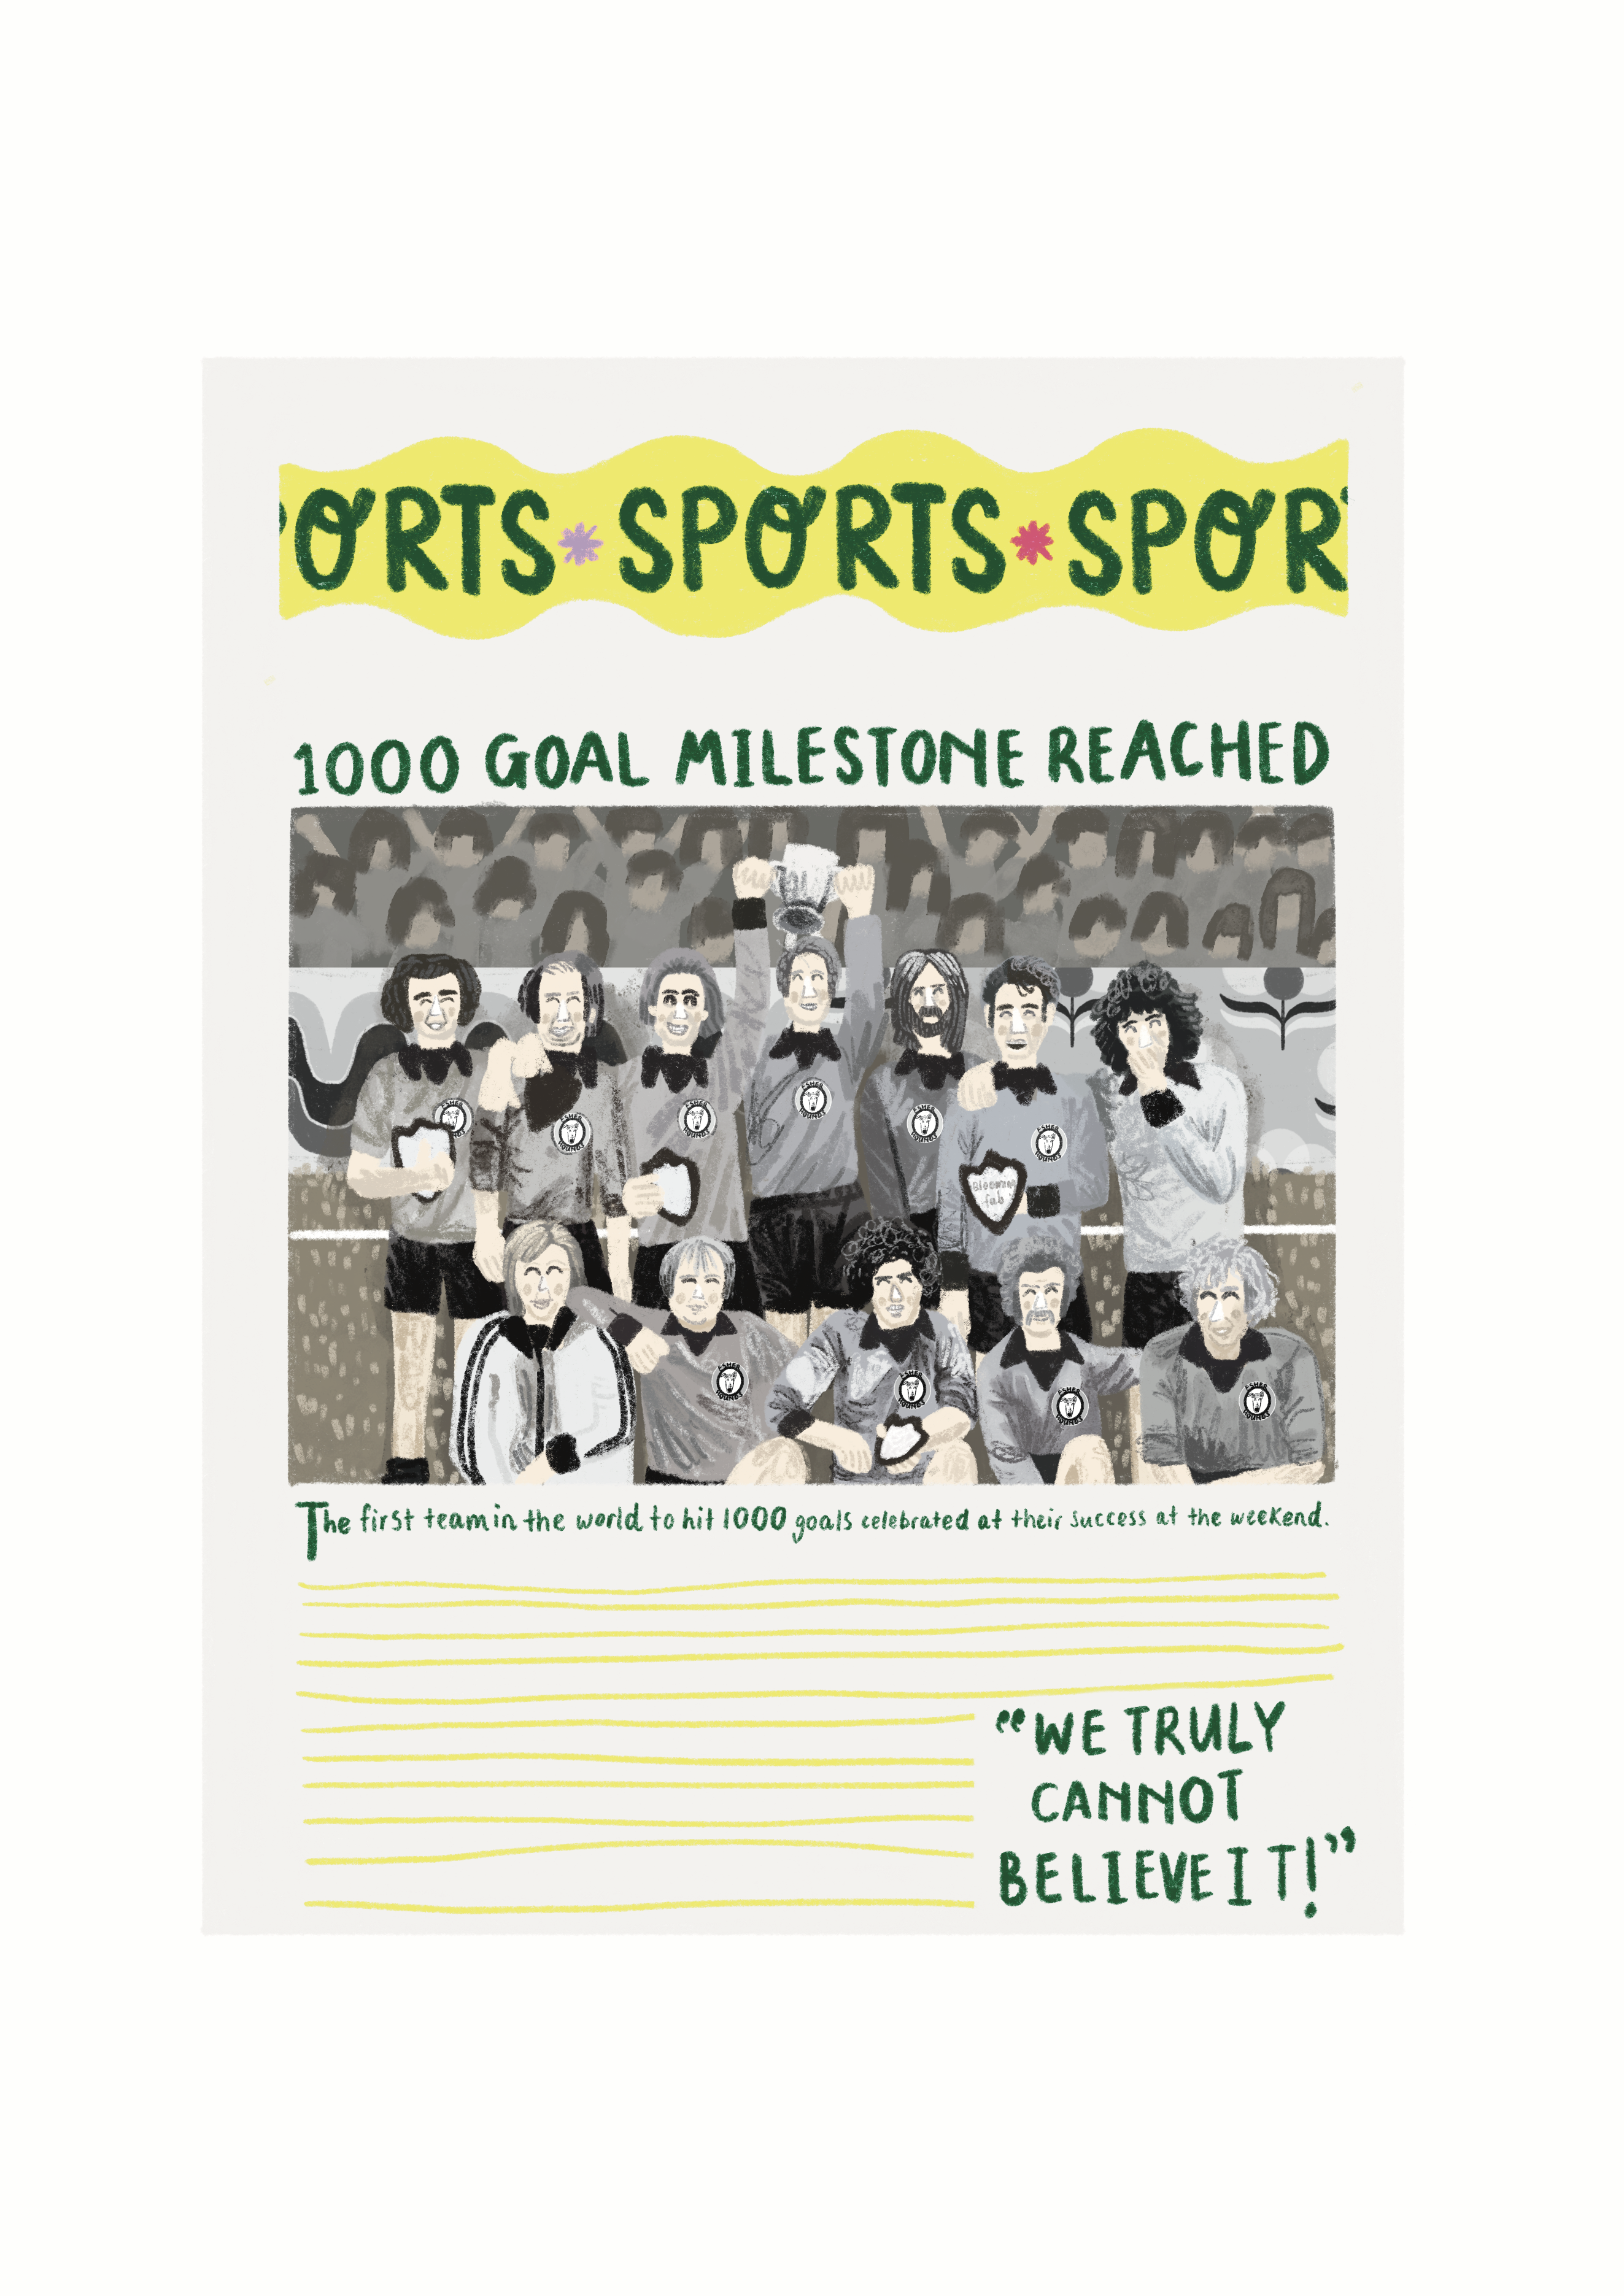 An illustration done by Hope Bullen with a mock old newspaper showing a football team who have won a prize for being the first team ever to score 1000 goals.